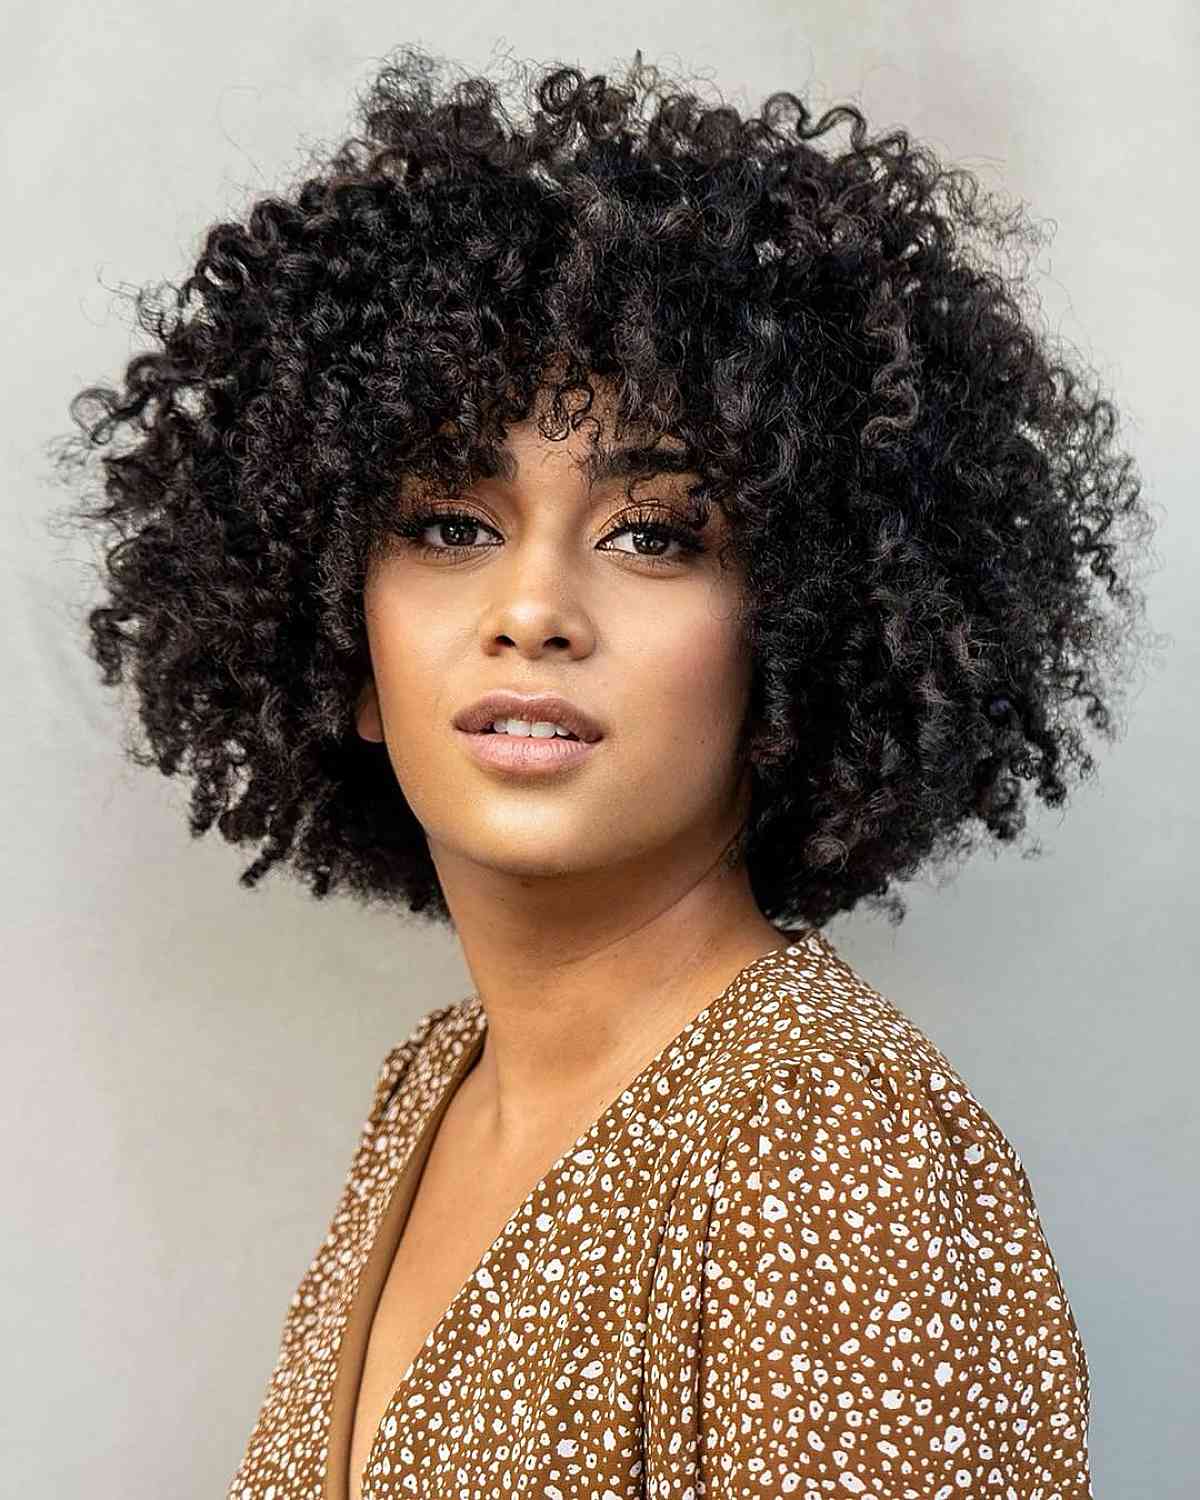 
how to flat iron short hair for volume,
How to add volume to your hair with flat iron,
how to add volume to hair,
how to add volume using flat iron for beginners,
best flat iron to add volume,
how to put volume in your hair with a straightener,
how to give hair more volume with flat iron,
How to get volume with flat iron?,